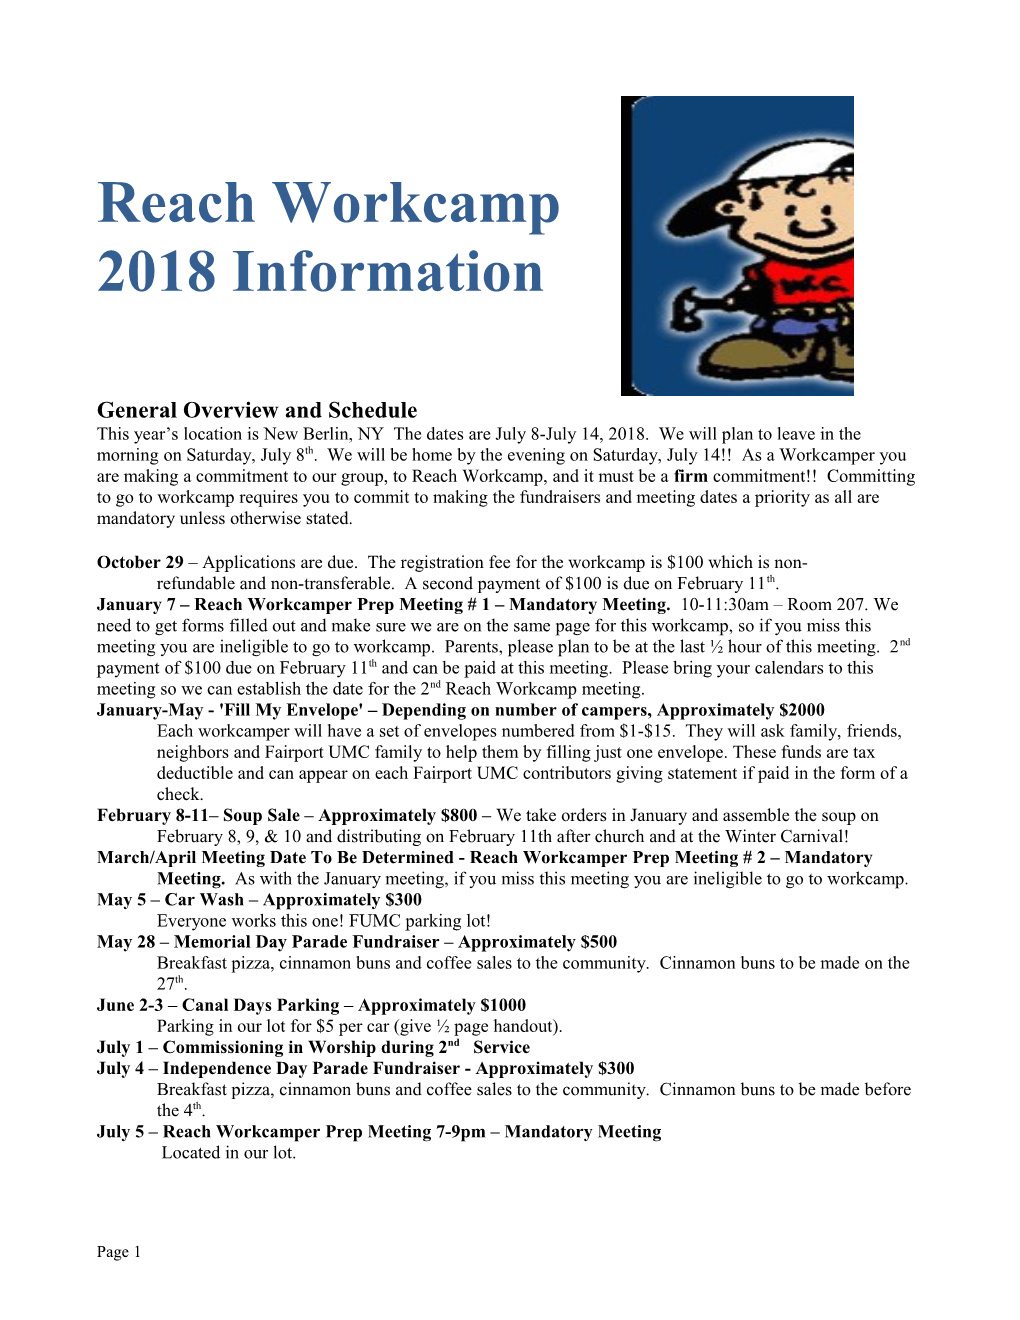 Calling All Workcampers